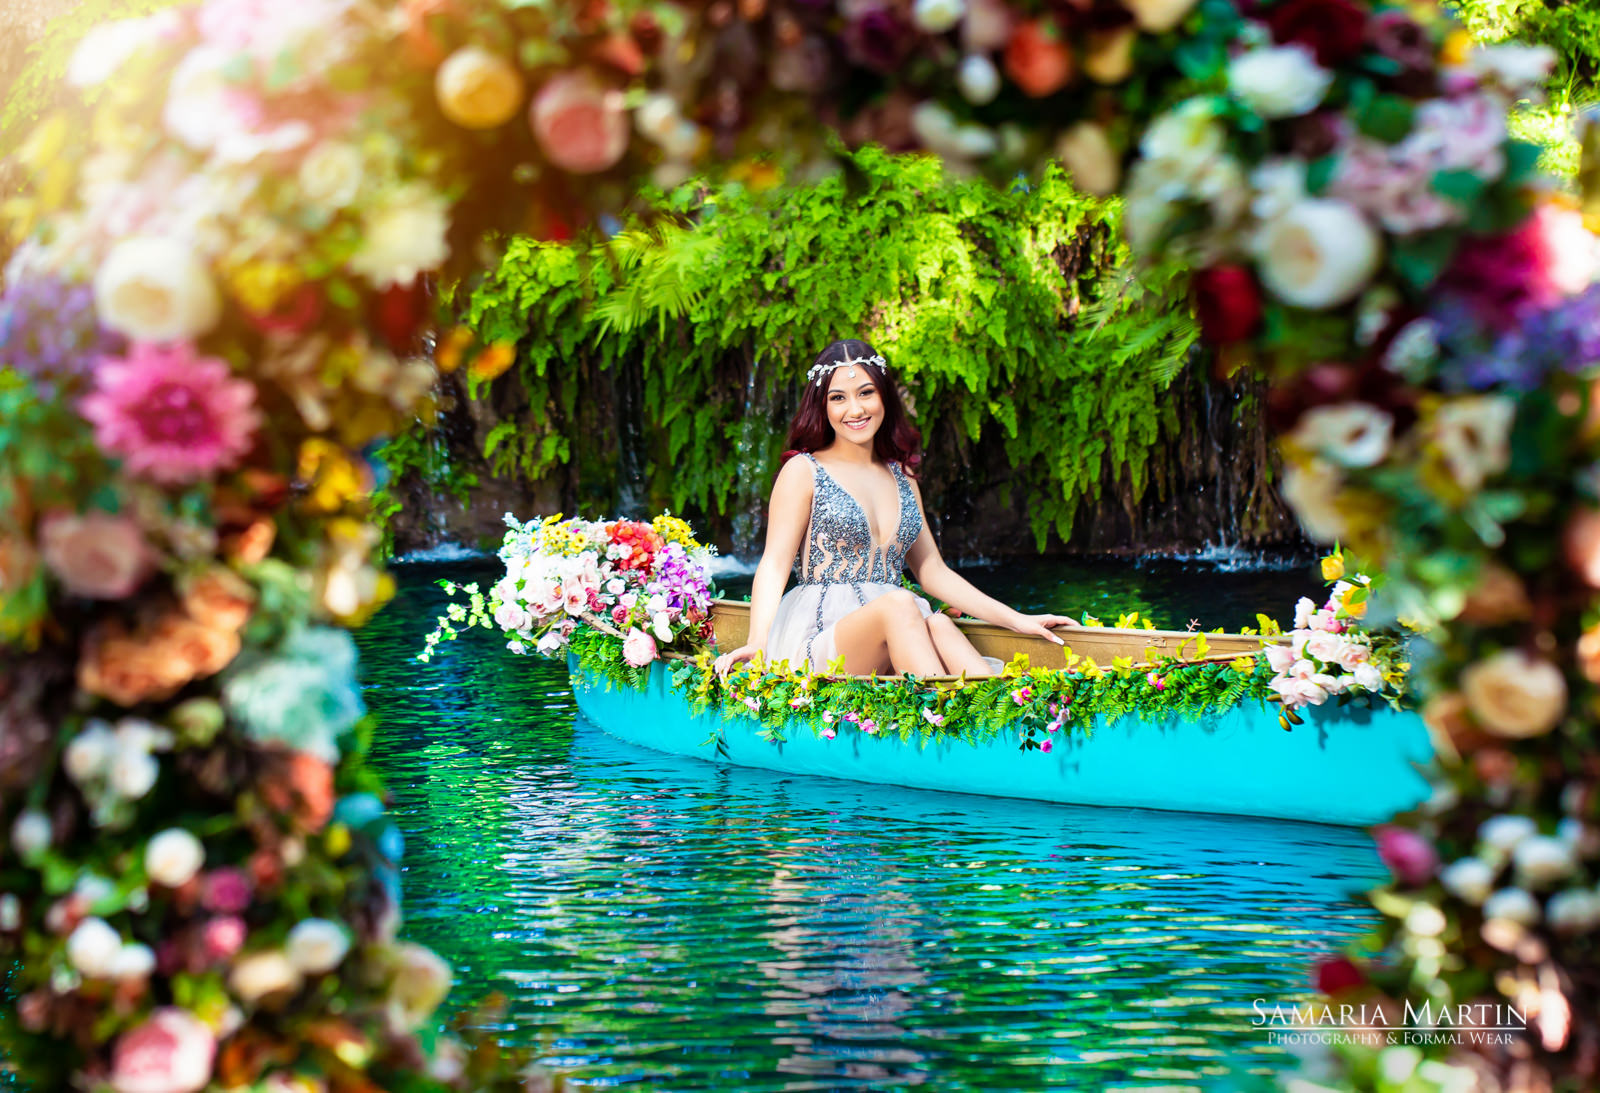 Quinceanera with flowers, quinceanera photoshoot in a lake, 15 photoshoot with flowers, best Tampa photographer, Samaria Martin Photography 3